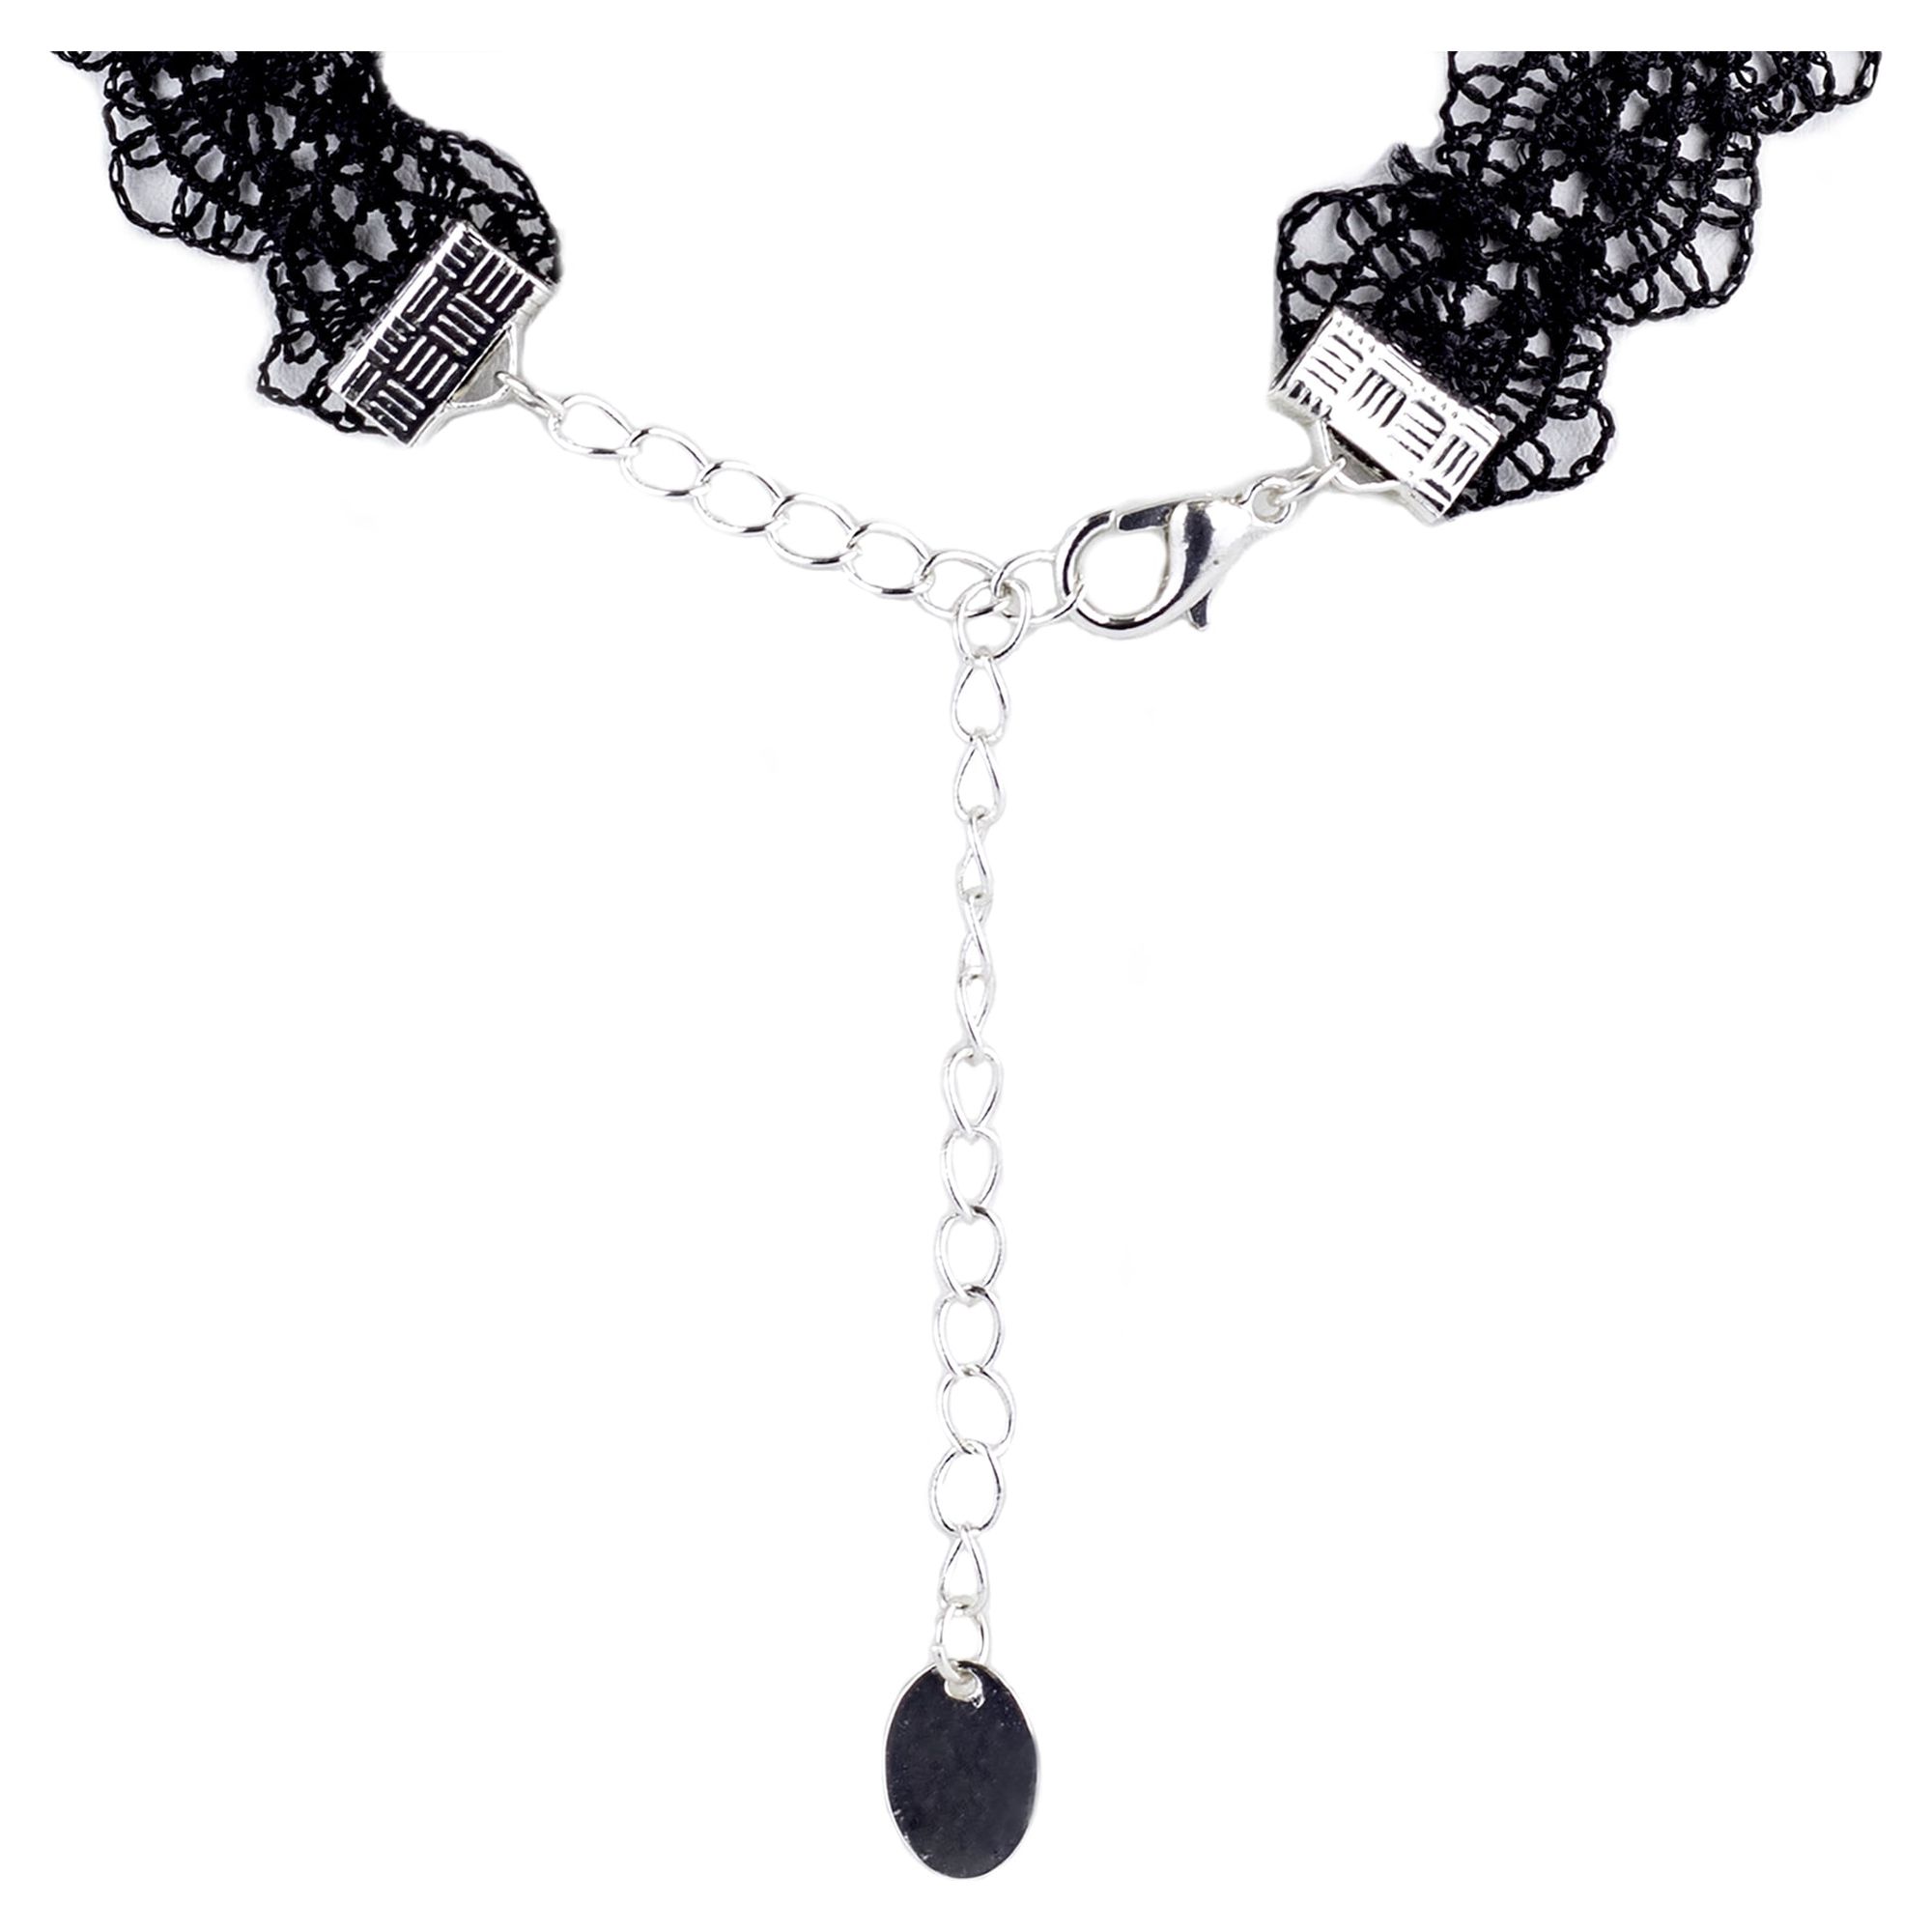 Claire's Teenagers Black Moon Choker Necklaces Set, Jewelry Gift, 3 Pack,  73248 